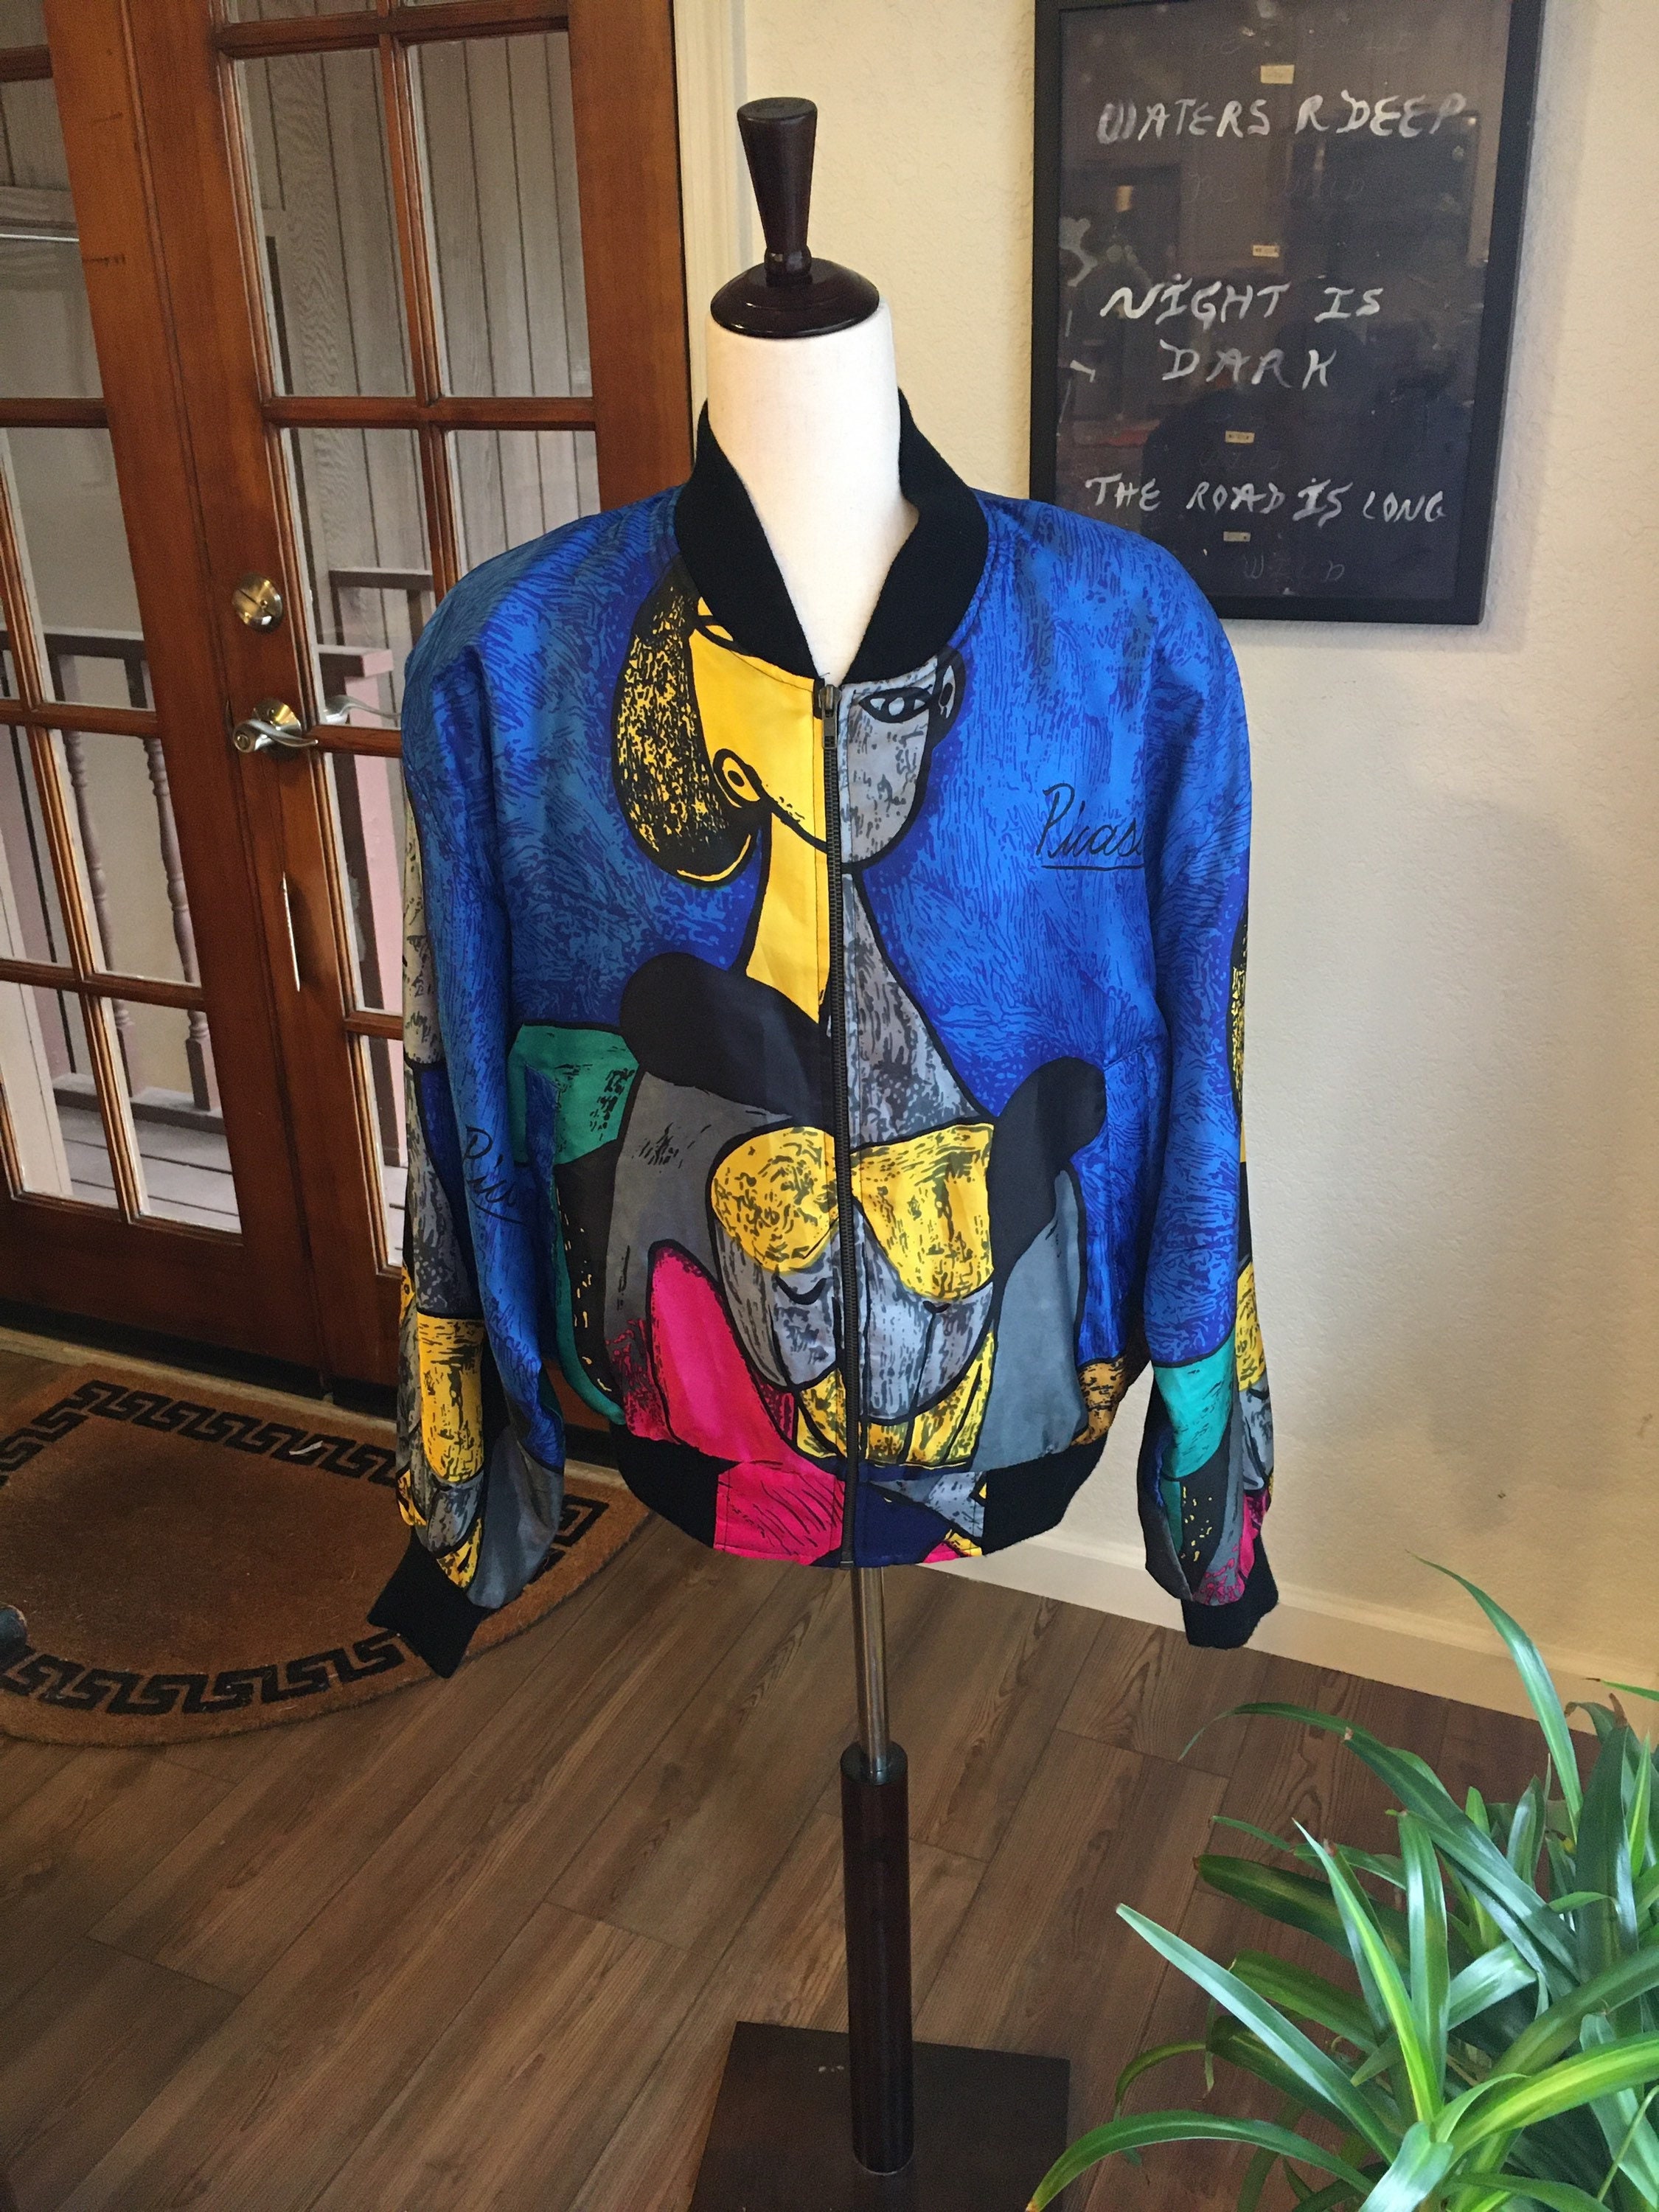 90s Picasso Jacket - Etsy